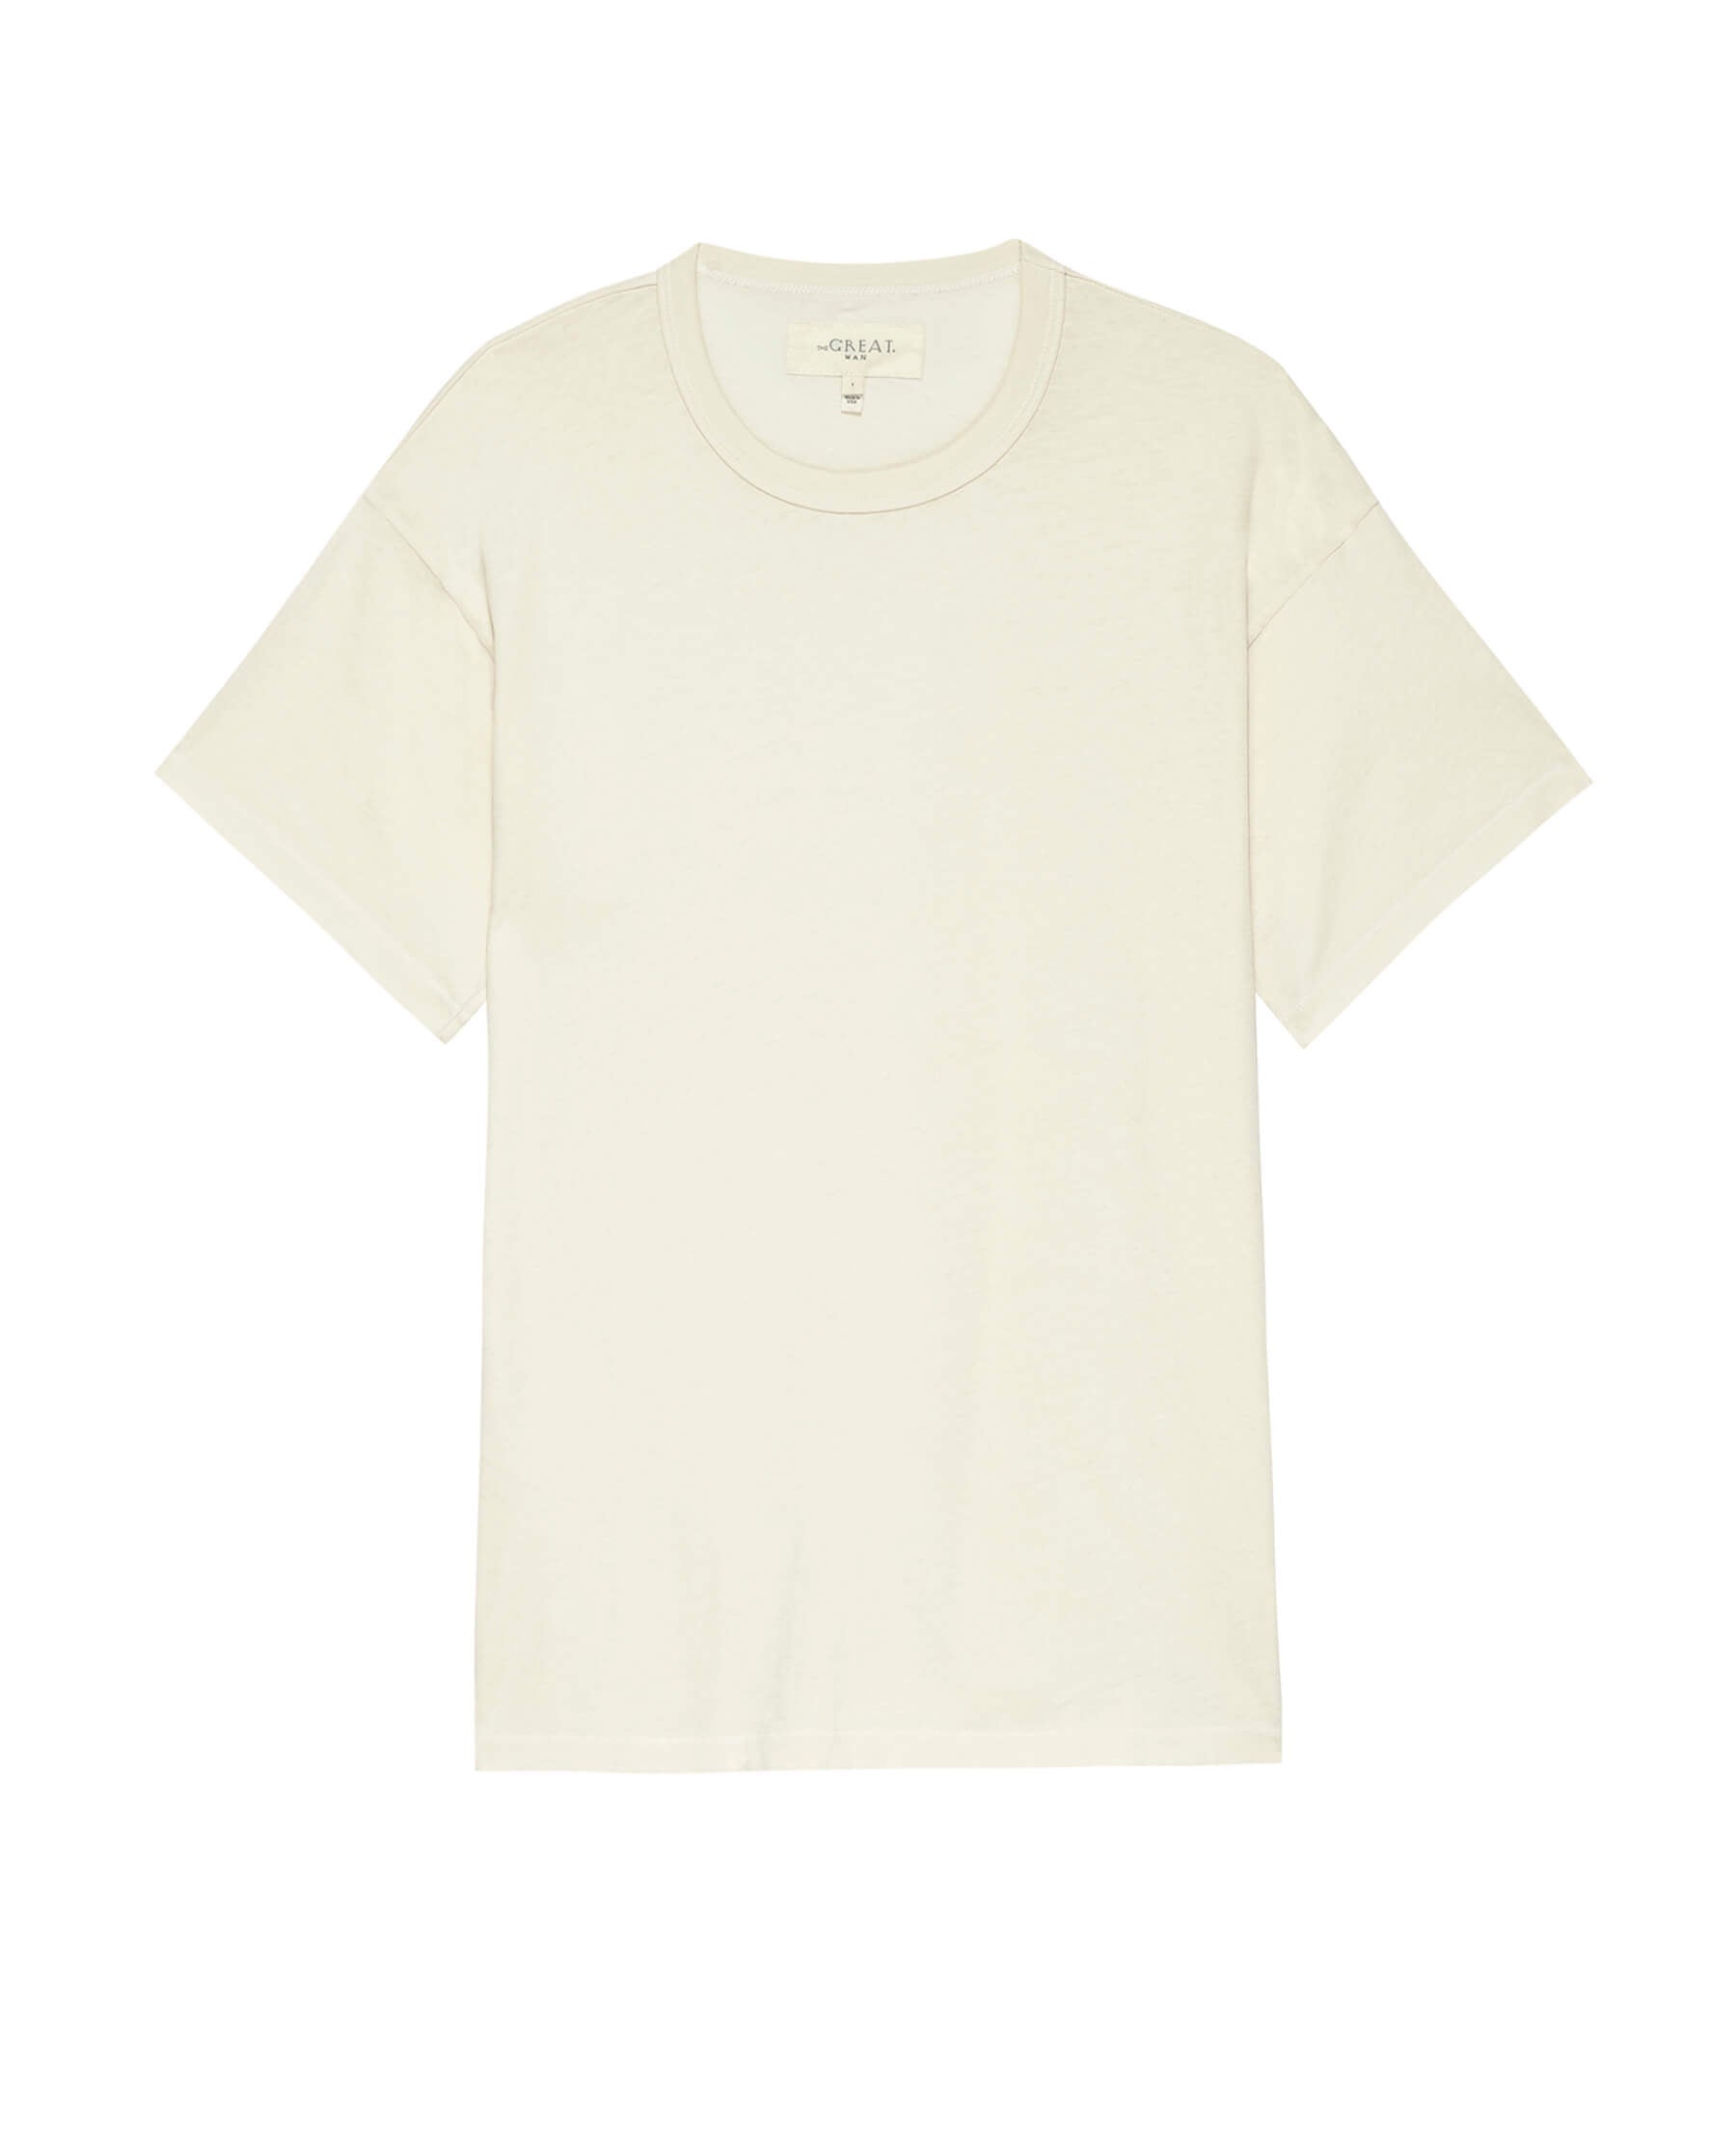 The Men's Boxy Crew. -- WASHED WHITE TEES THE GREAT. MAN